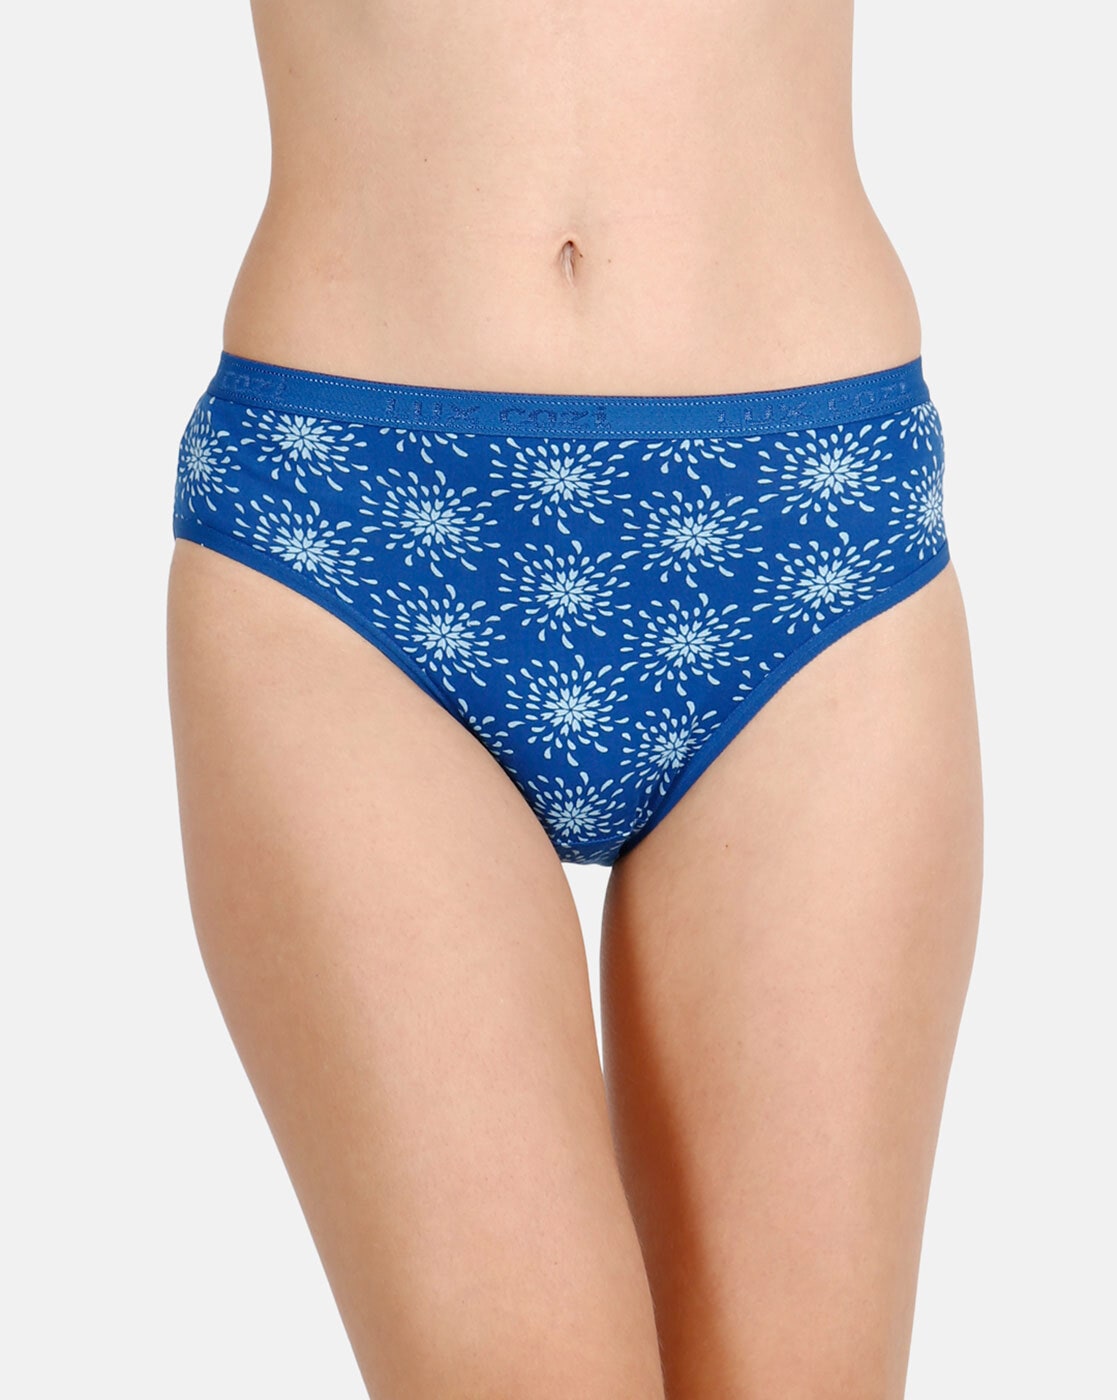 Flower Printed Panty at best price in Indore by Doshi Industries